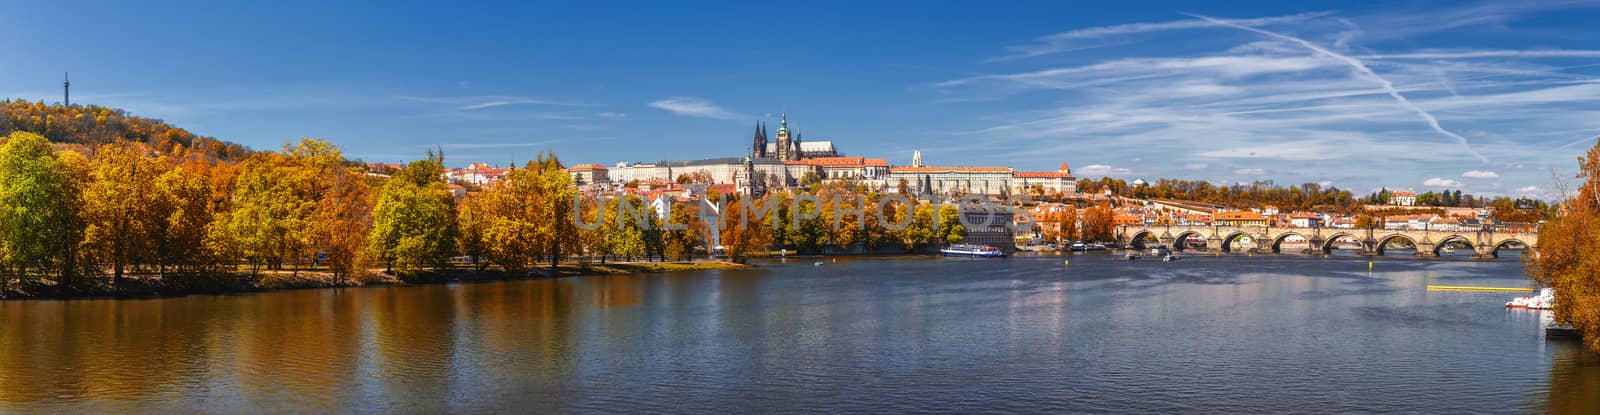 Prague Castle and Old City day view with blue sky, travel vivid  by DaLiu